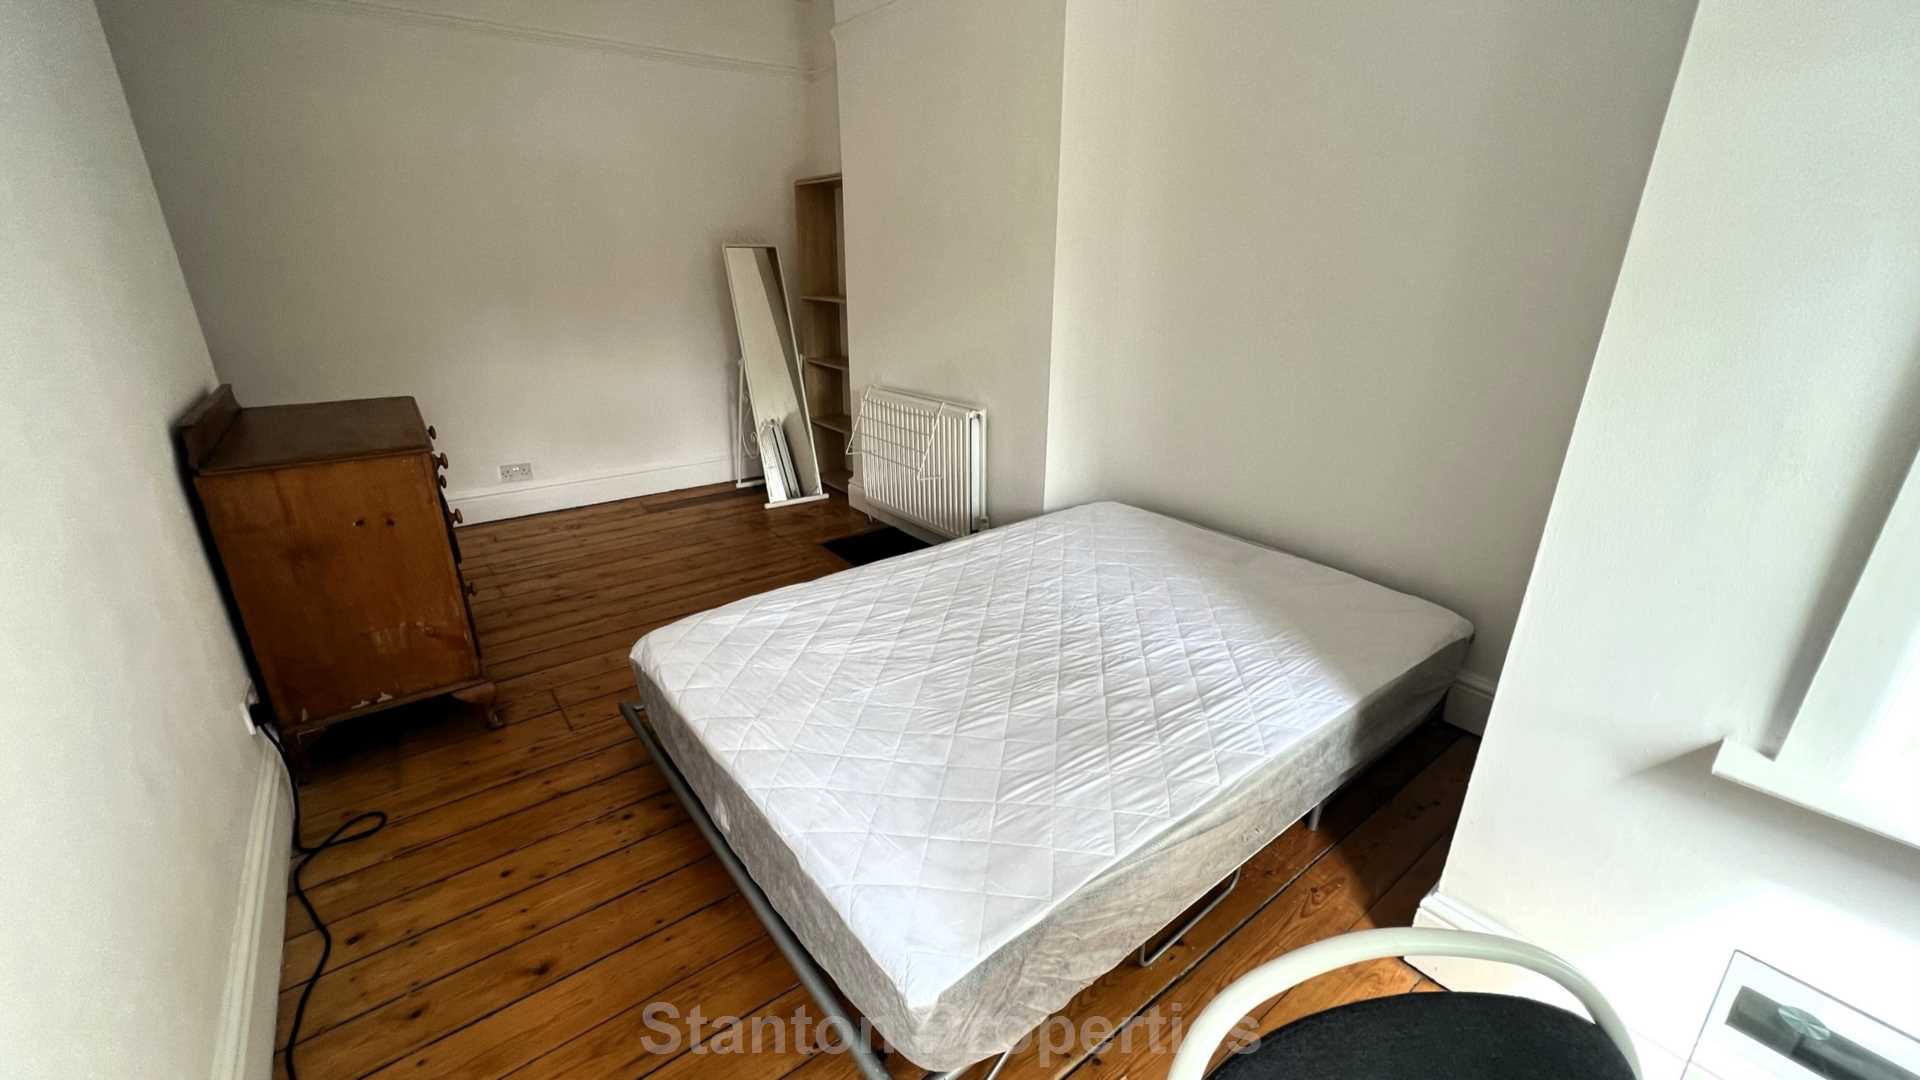 £145 pppw, Linden Grove, Fallowfield, Image 16